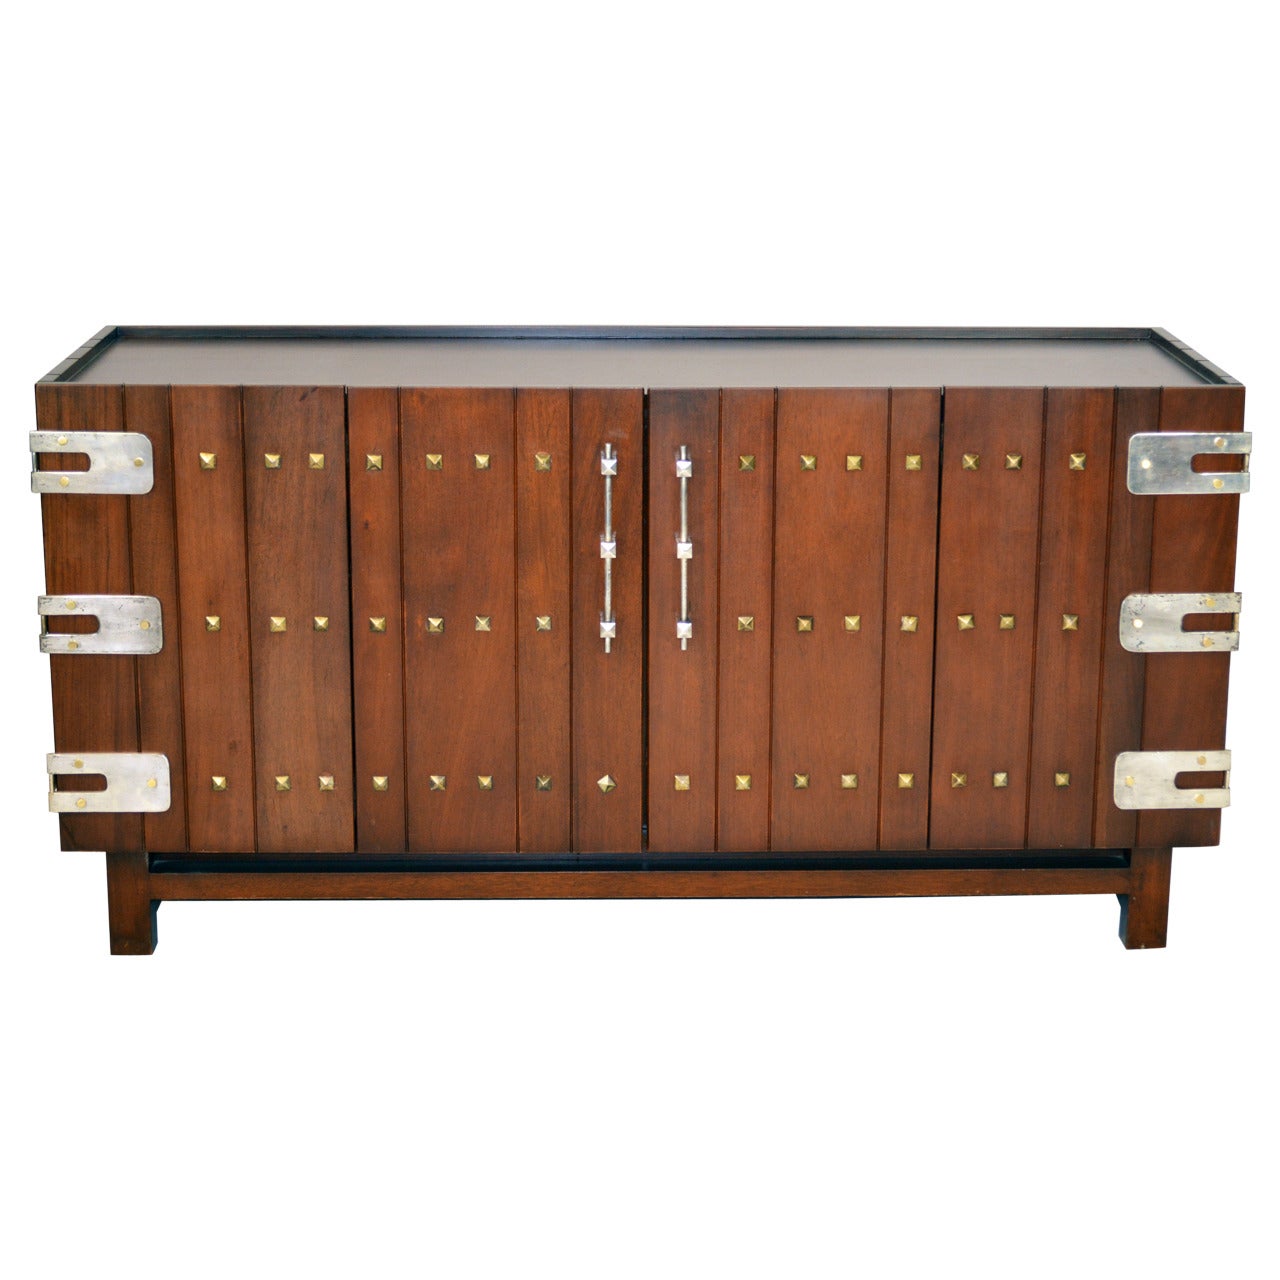 Edmond J. Spence "Continental-American Collection" Cabinet